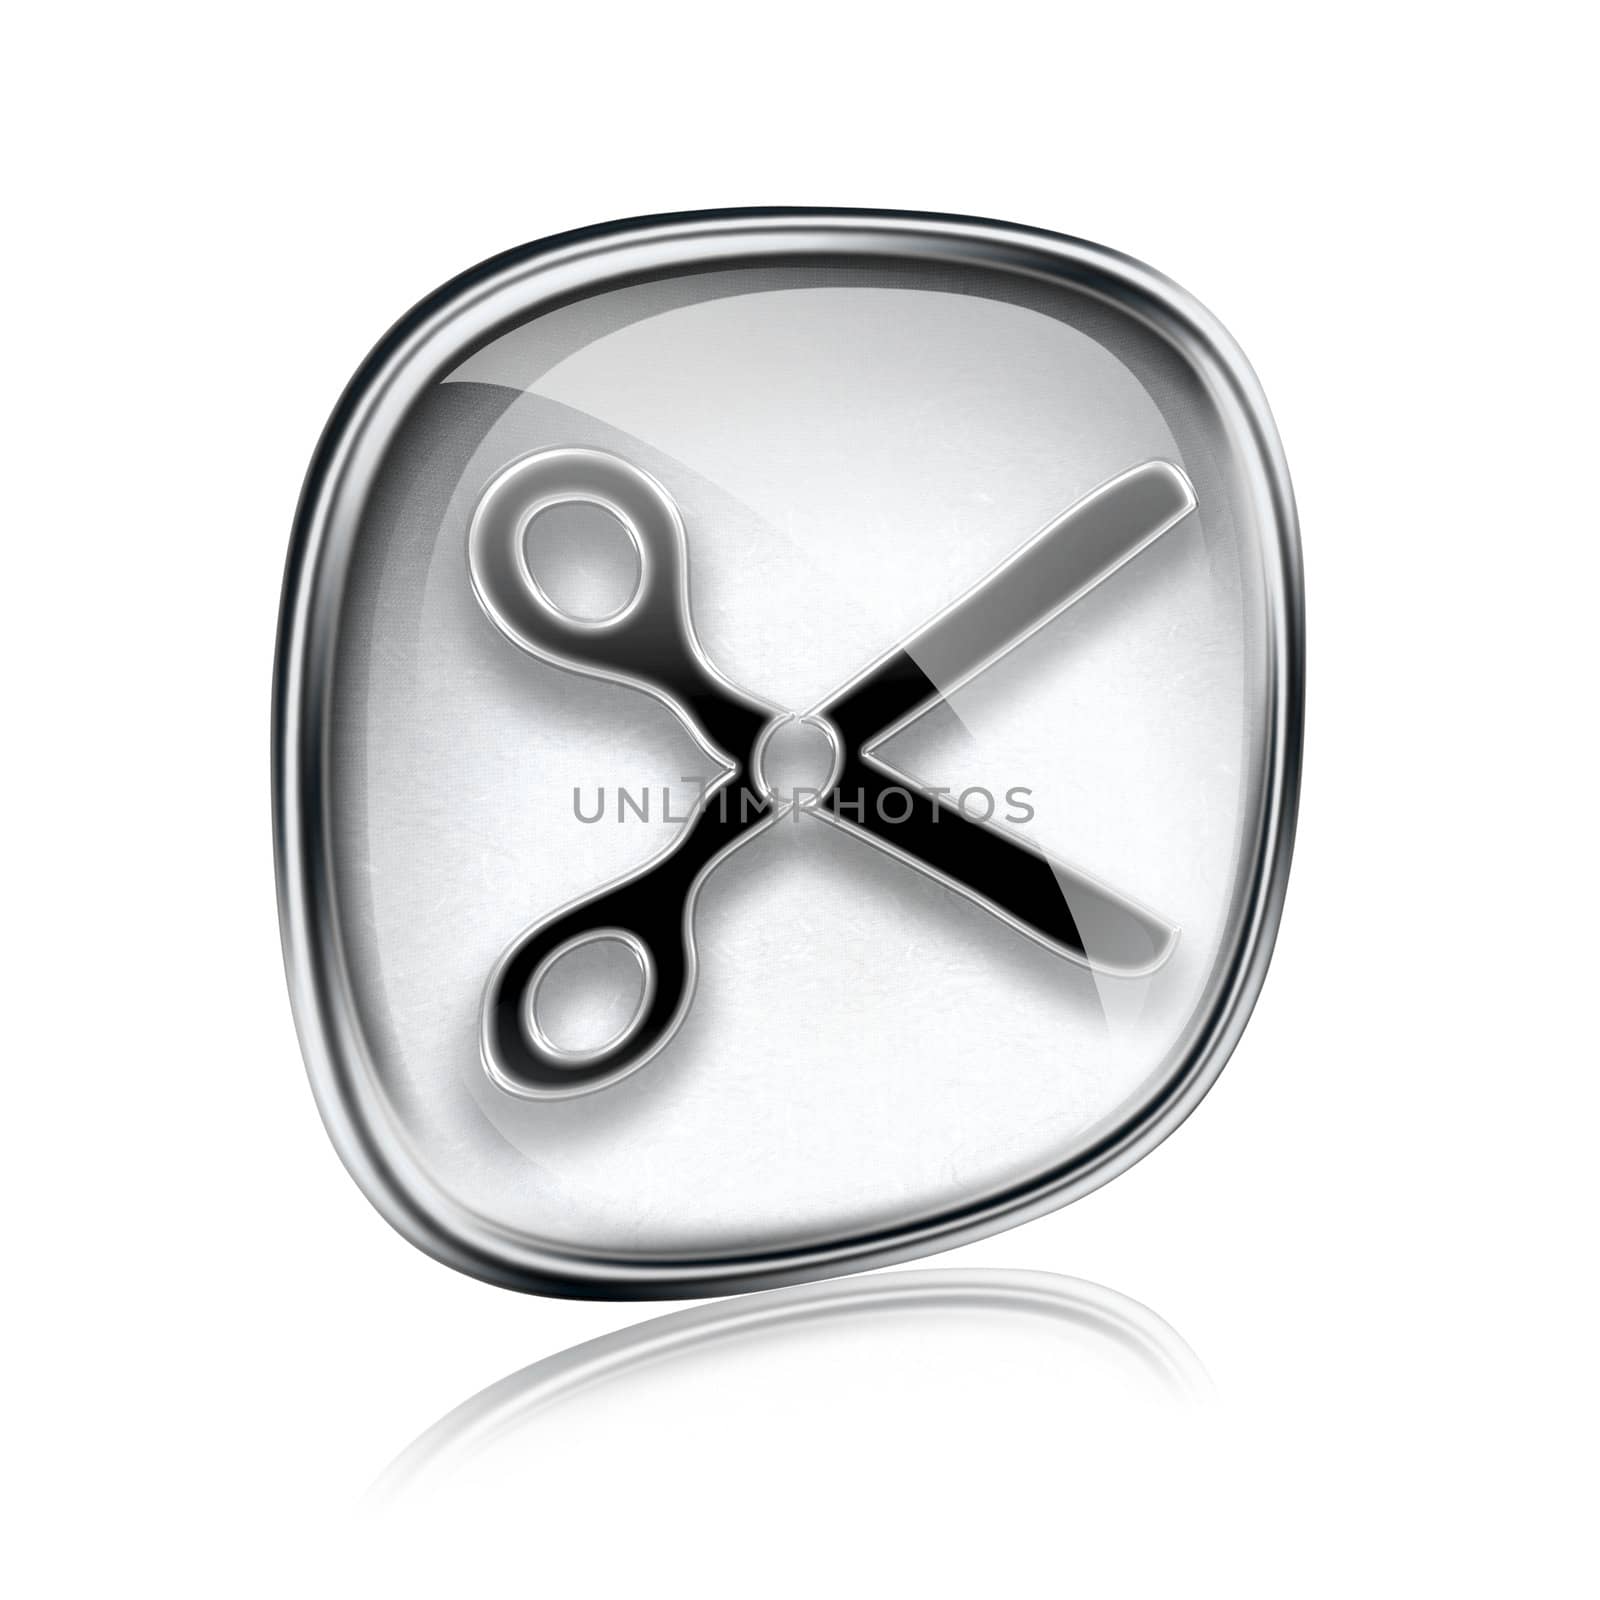 scissors icon grey glass, isolated on white background.